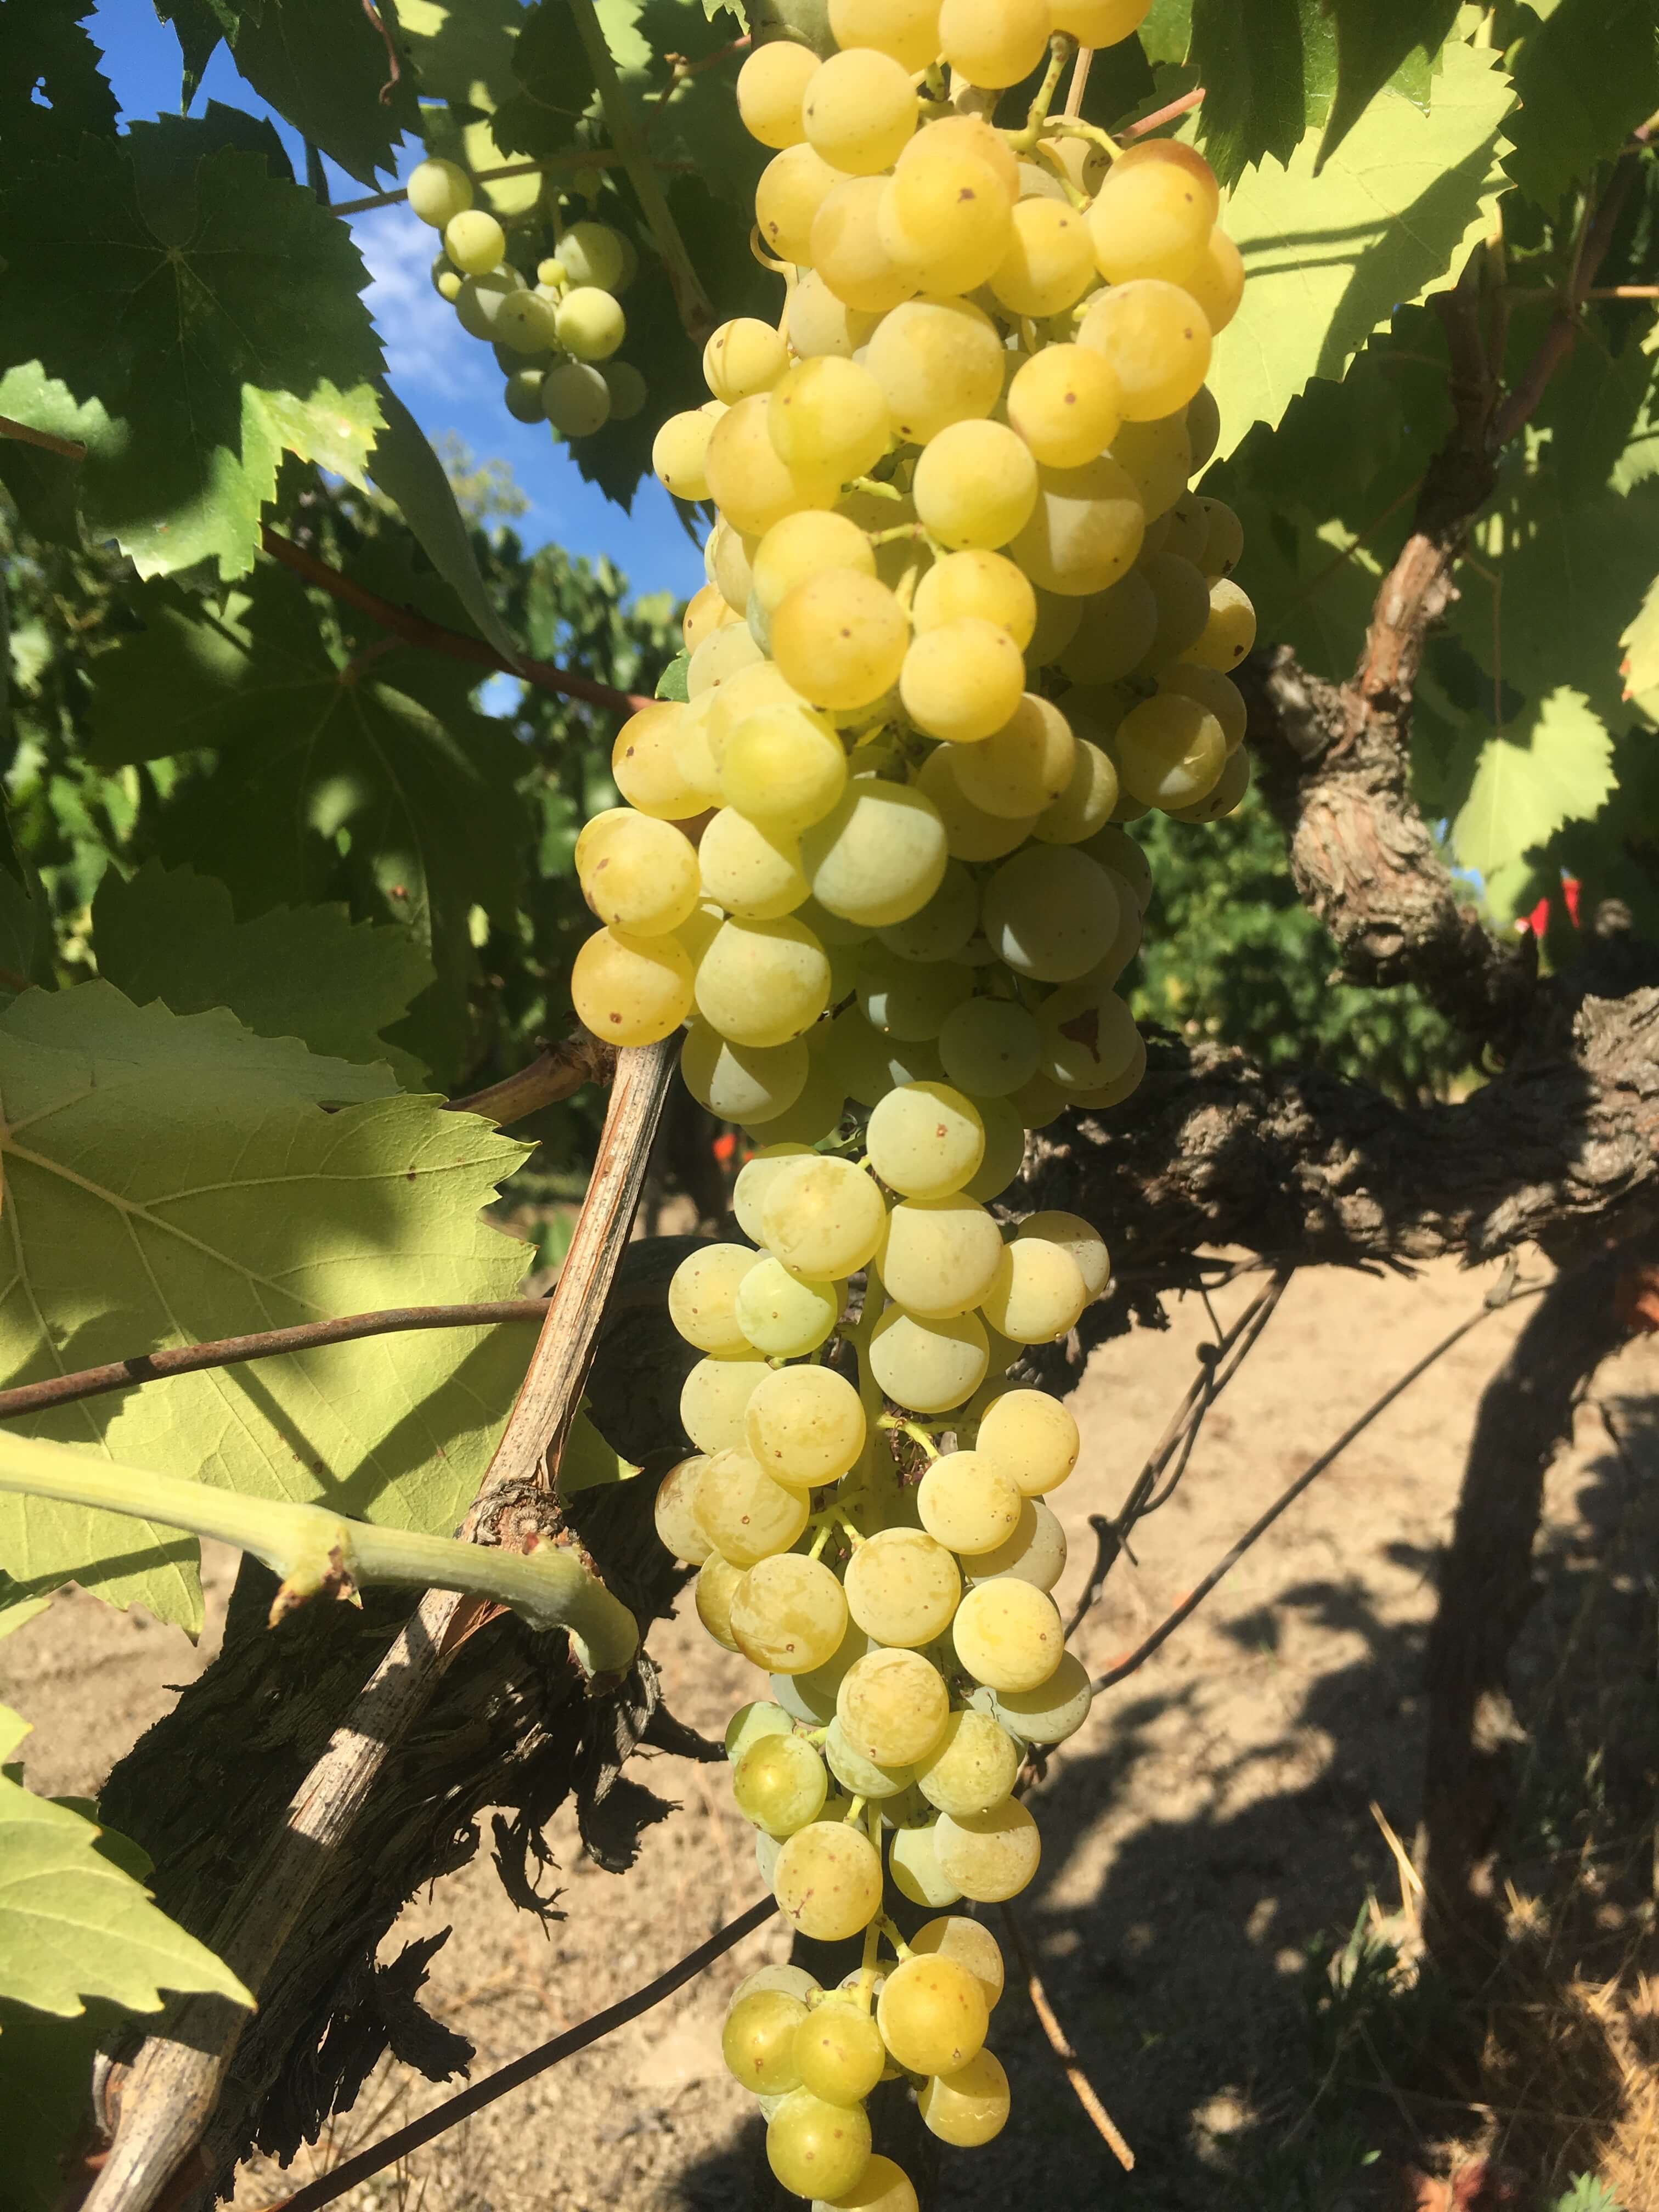 The extreme heat and dry climate this year may give Italian wine producers a reduction in grapes and wine this year. But perhaps it may lead to better wine? 